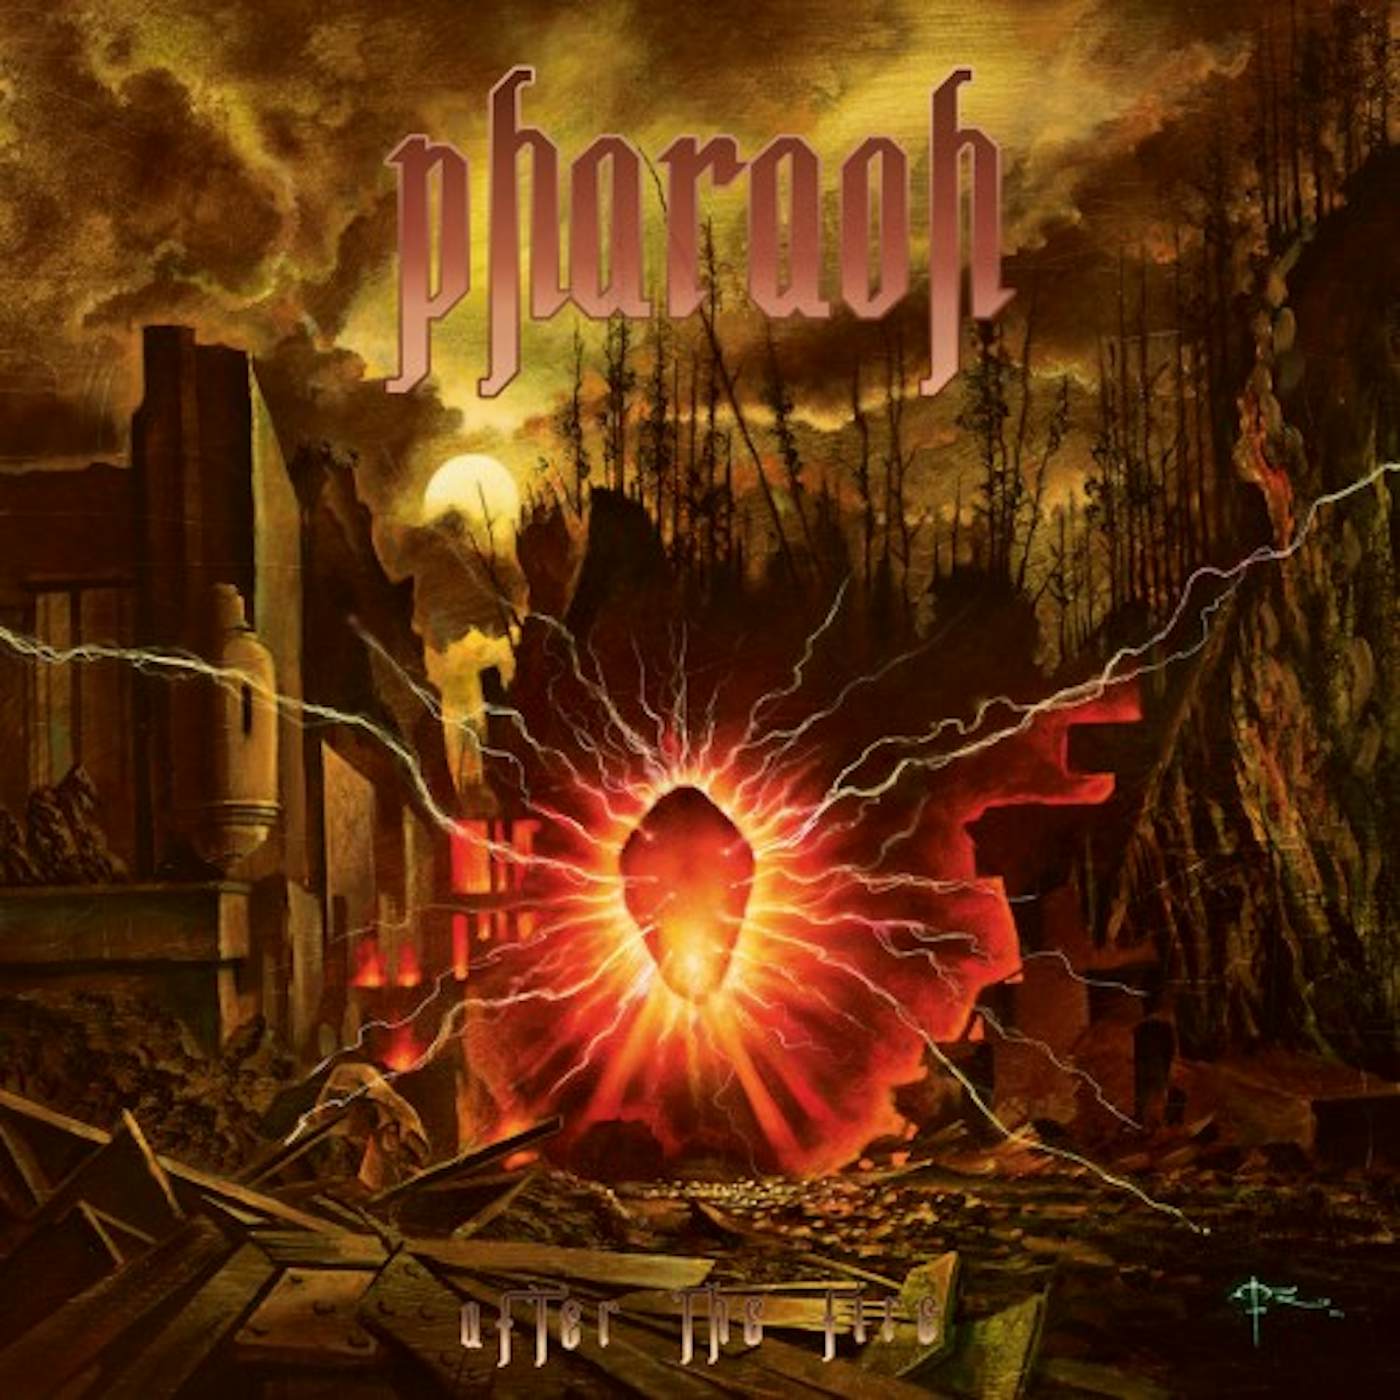 Pharaoh AFTER THE FIRE Vinyl Record